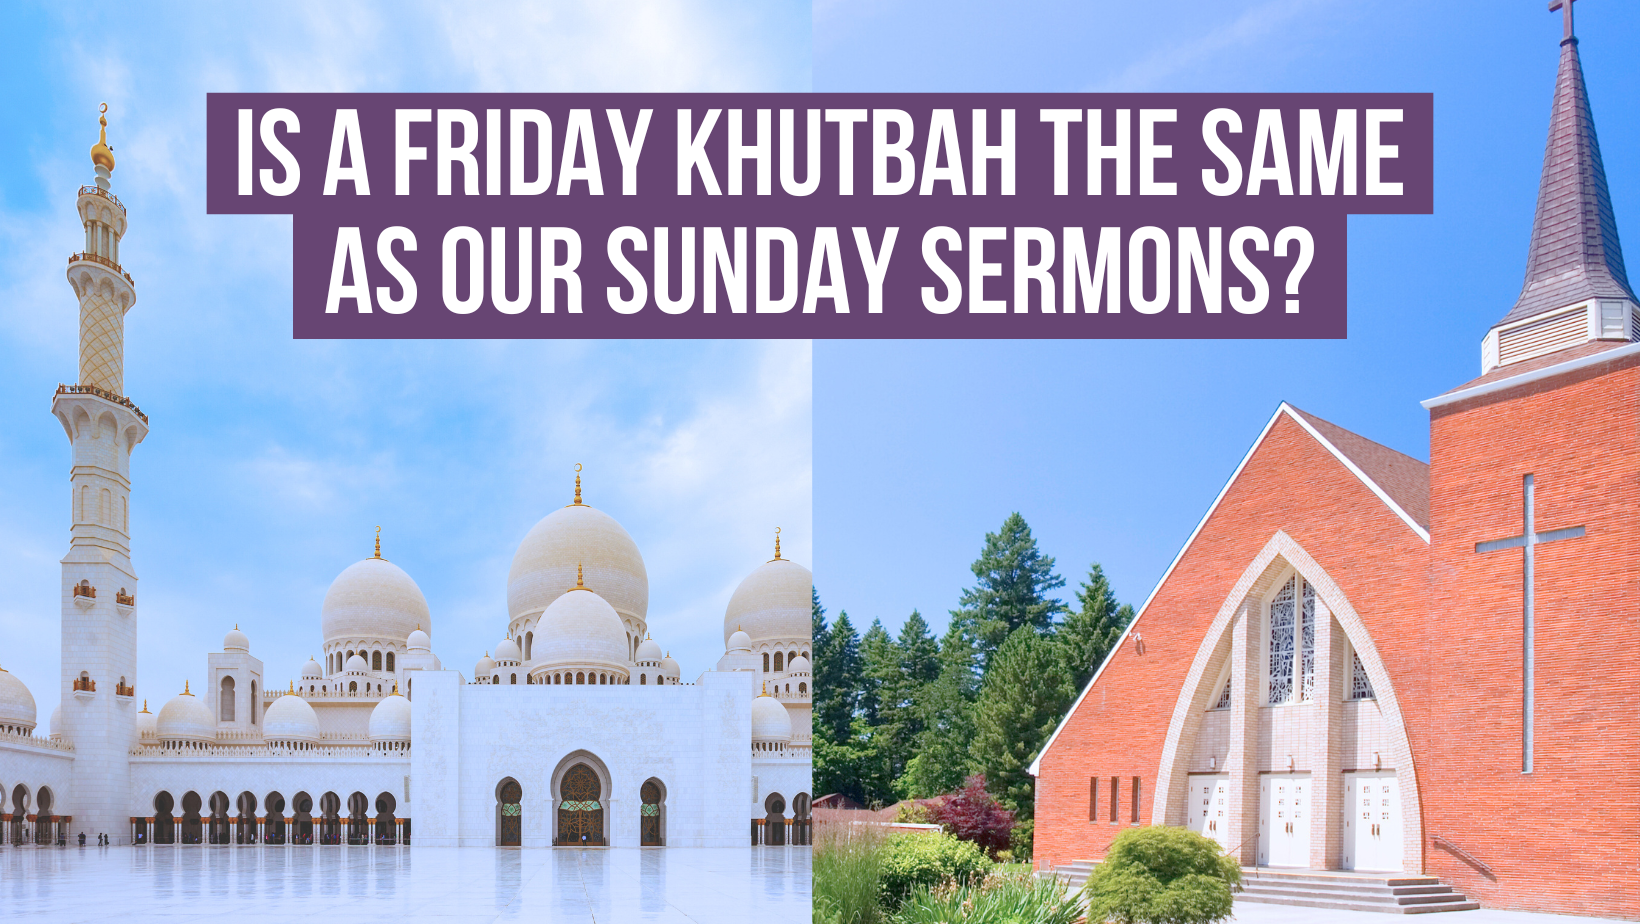 Is a Friday khutbah the same as our Sunday sermons?